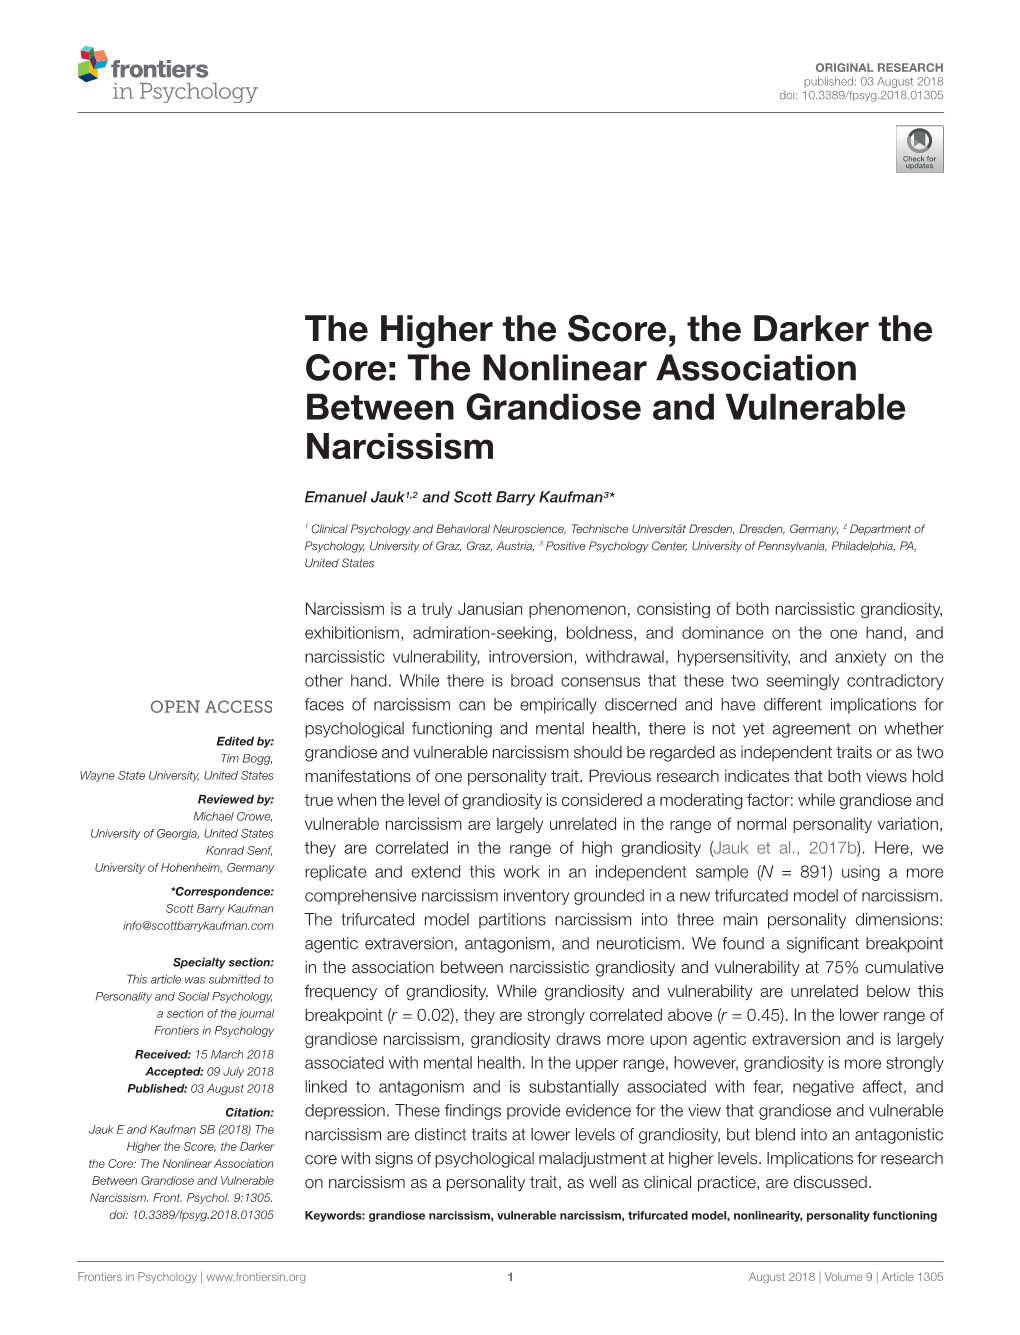 The Nonlinear Association Between Grandiose and Vulnerable Narcissism